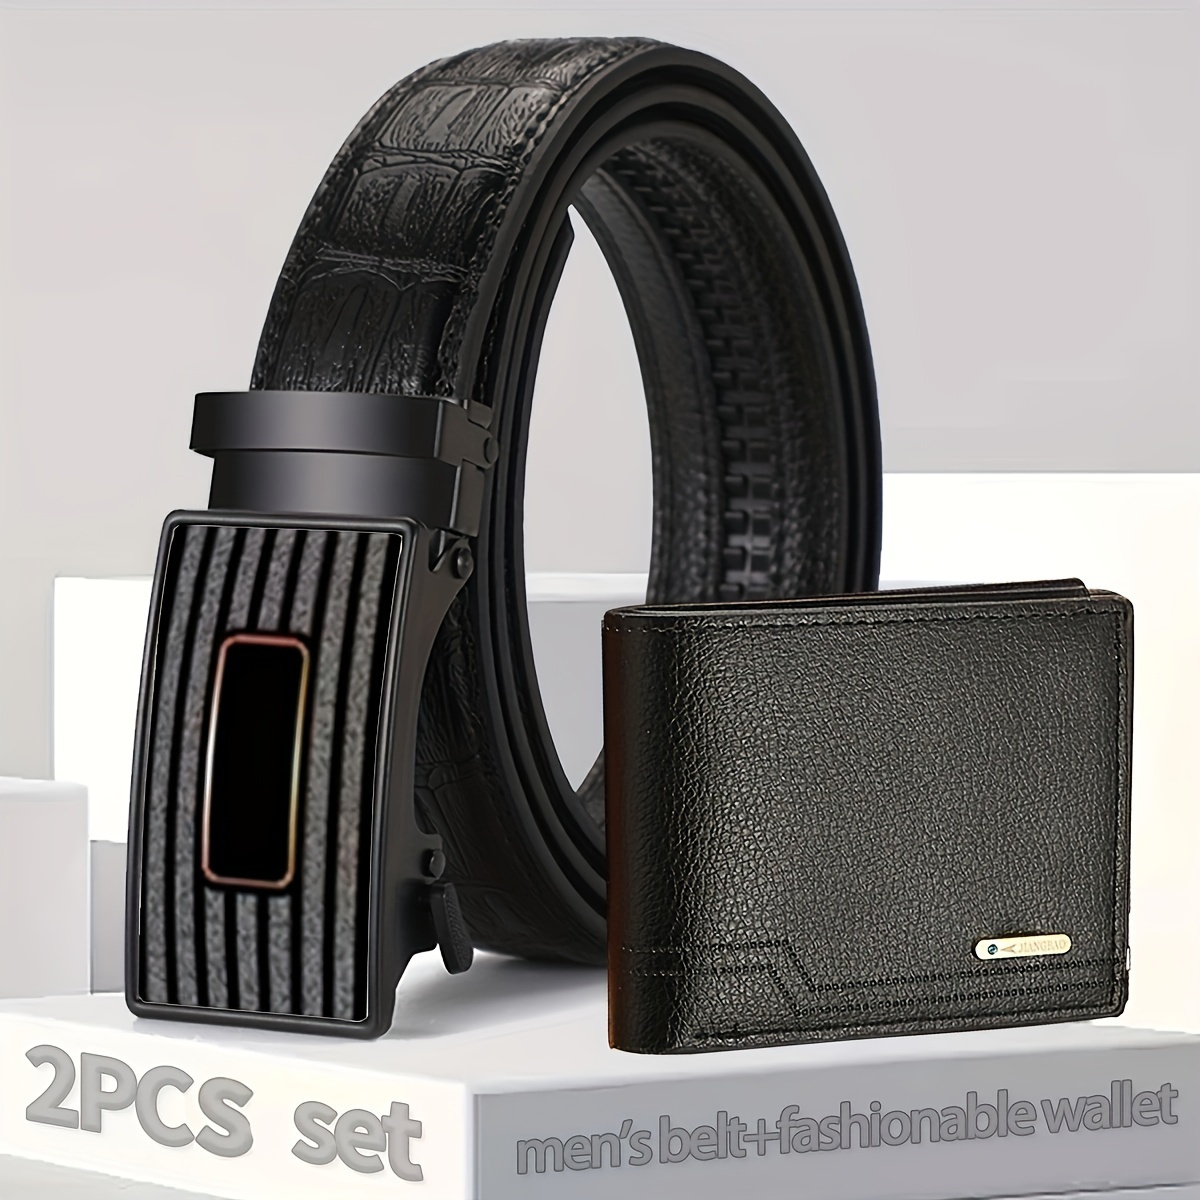 

2pcs Men's Pu Leather Belt + Wallet Set, Automatic Buckle Belt For Boyfriend Dad Brother, Halloween Birthday Gift, Business Fashion Pants Belt (length Can Be Cut)